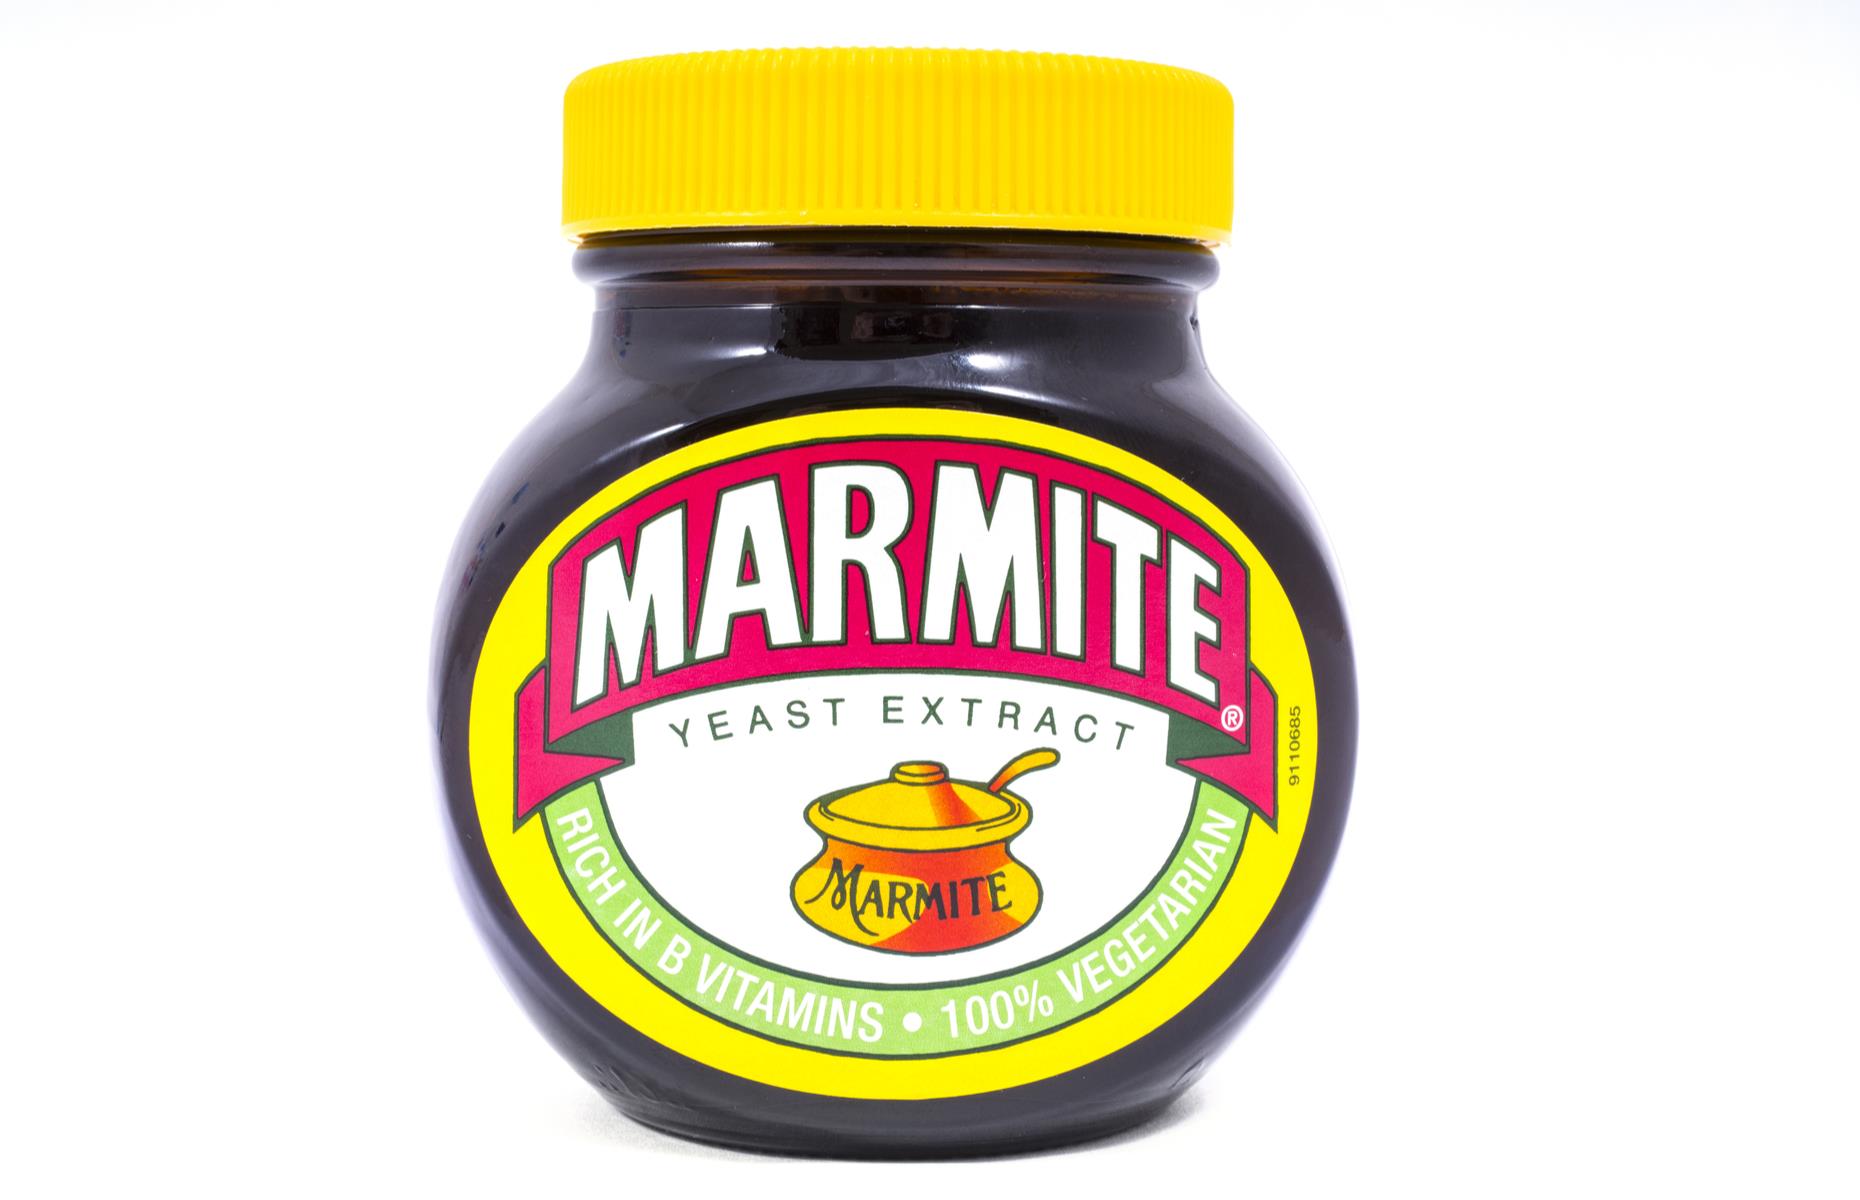 Marmite comes from Burton-on-Trent